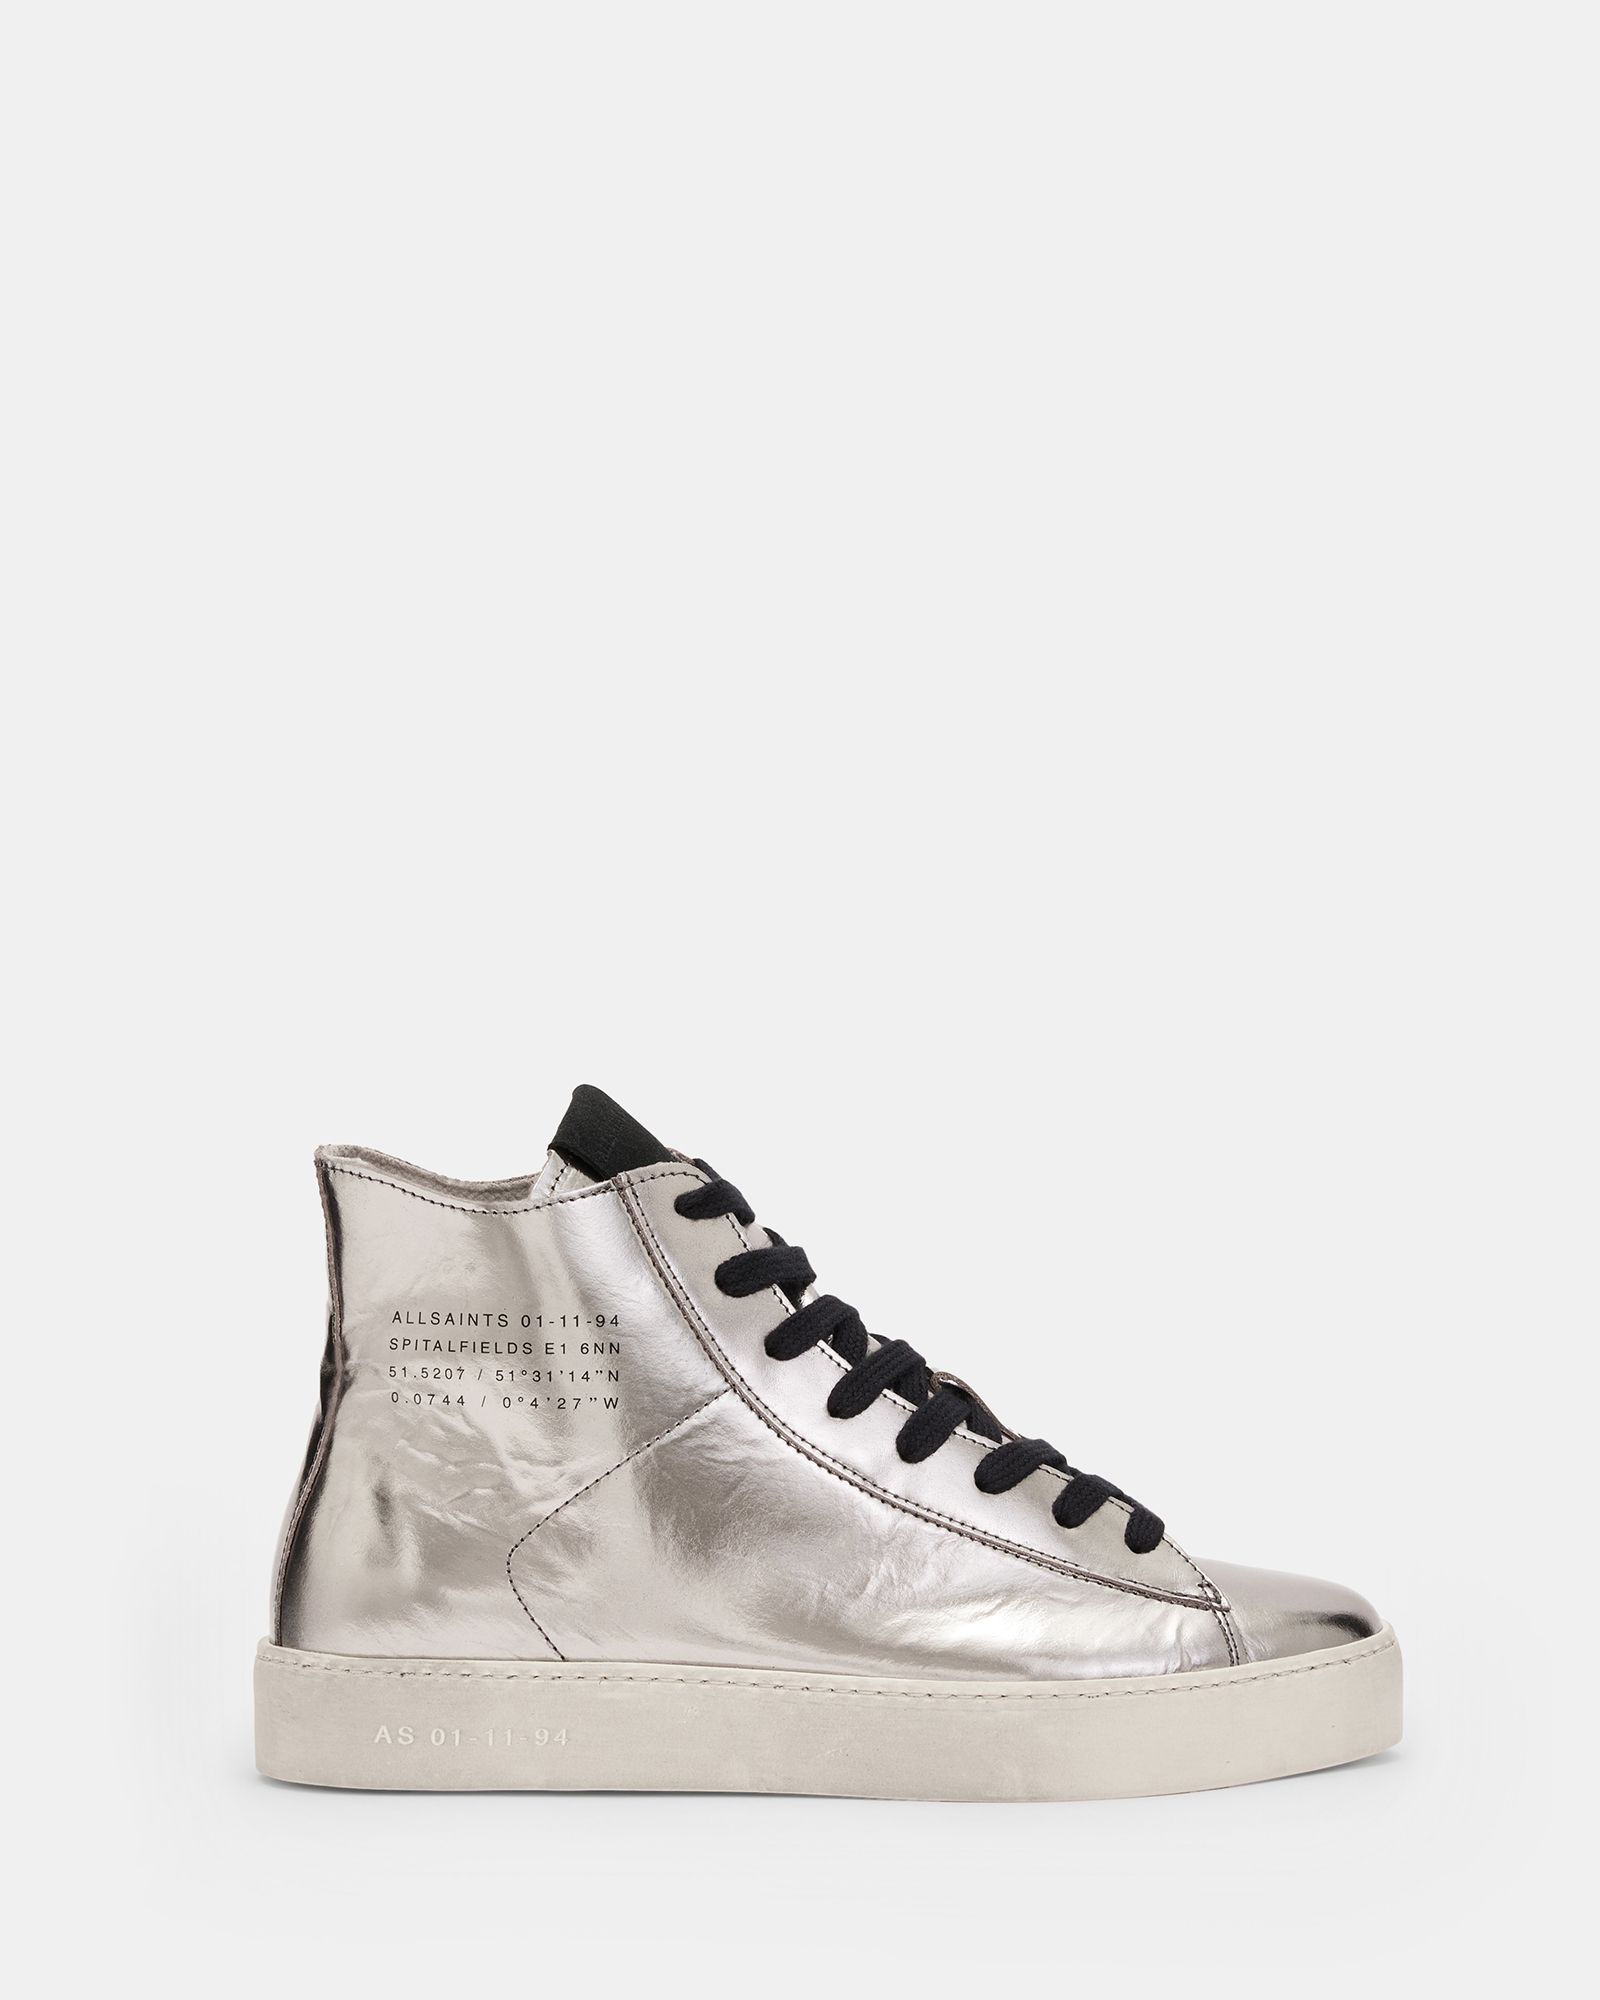 Tana Metallic Leather High Top Sneakers Silver | ALLSAINTS US | AllSaints US